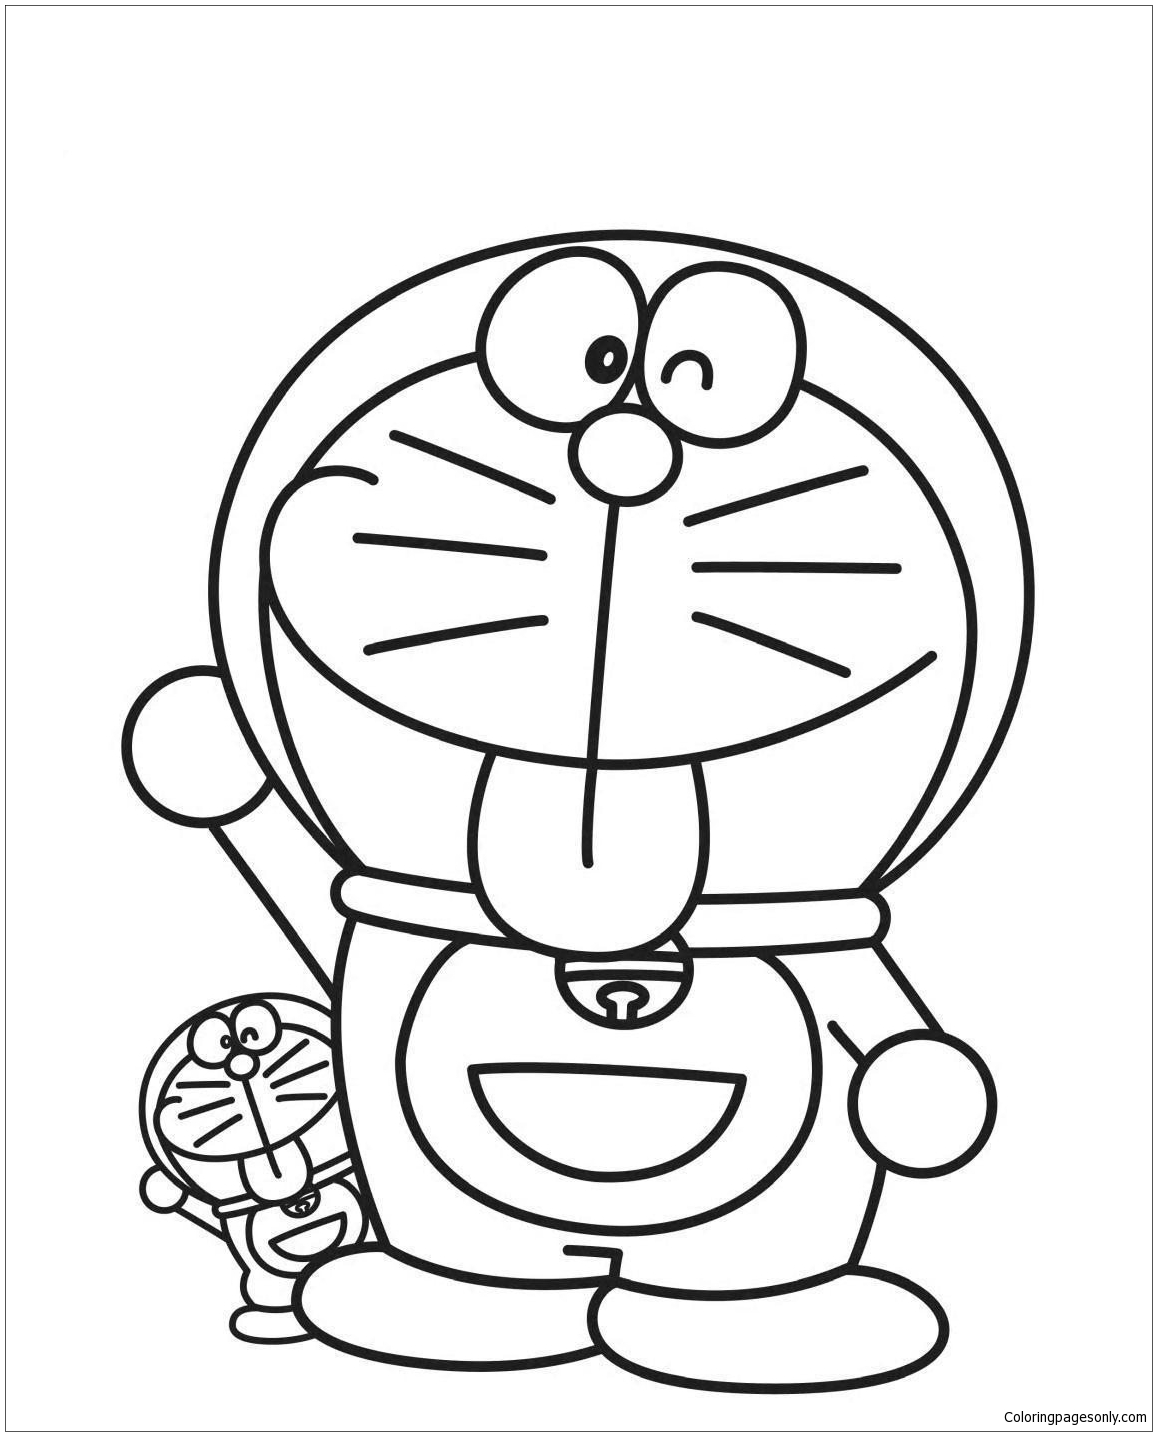 Big And Little Doraemon Coloring Pages - Doraemon Coloring Pages - Coloring  Pages For Kids And Adults